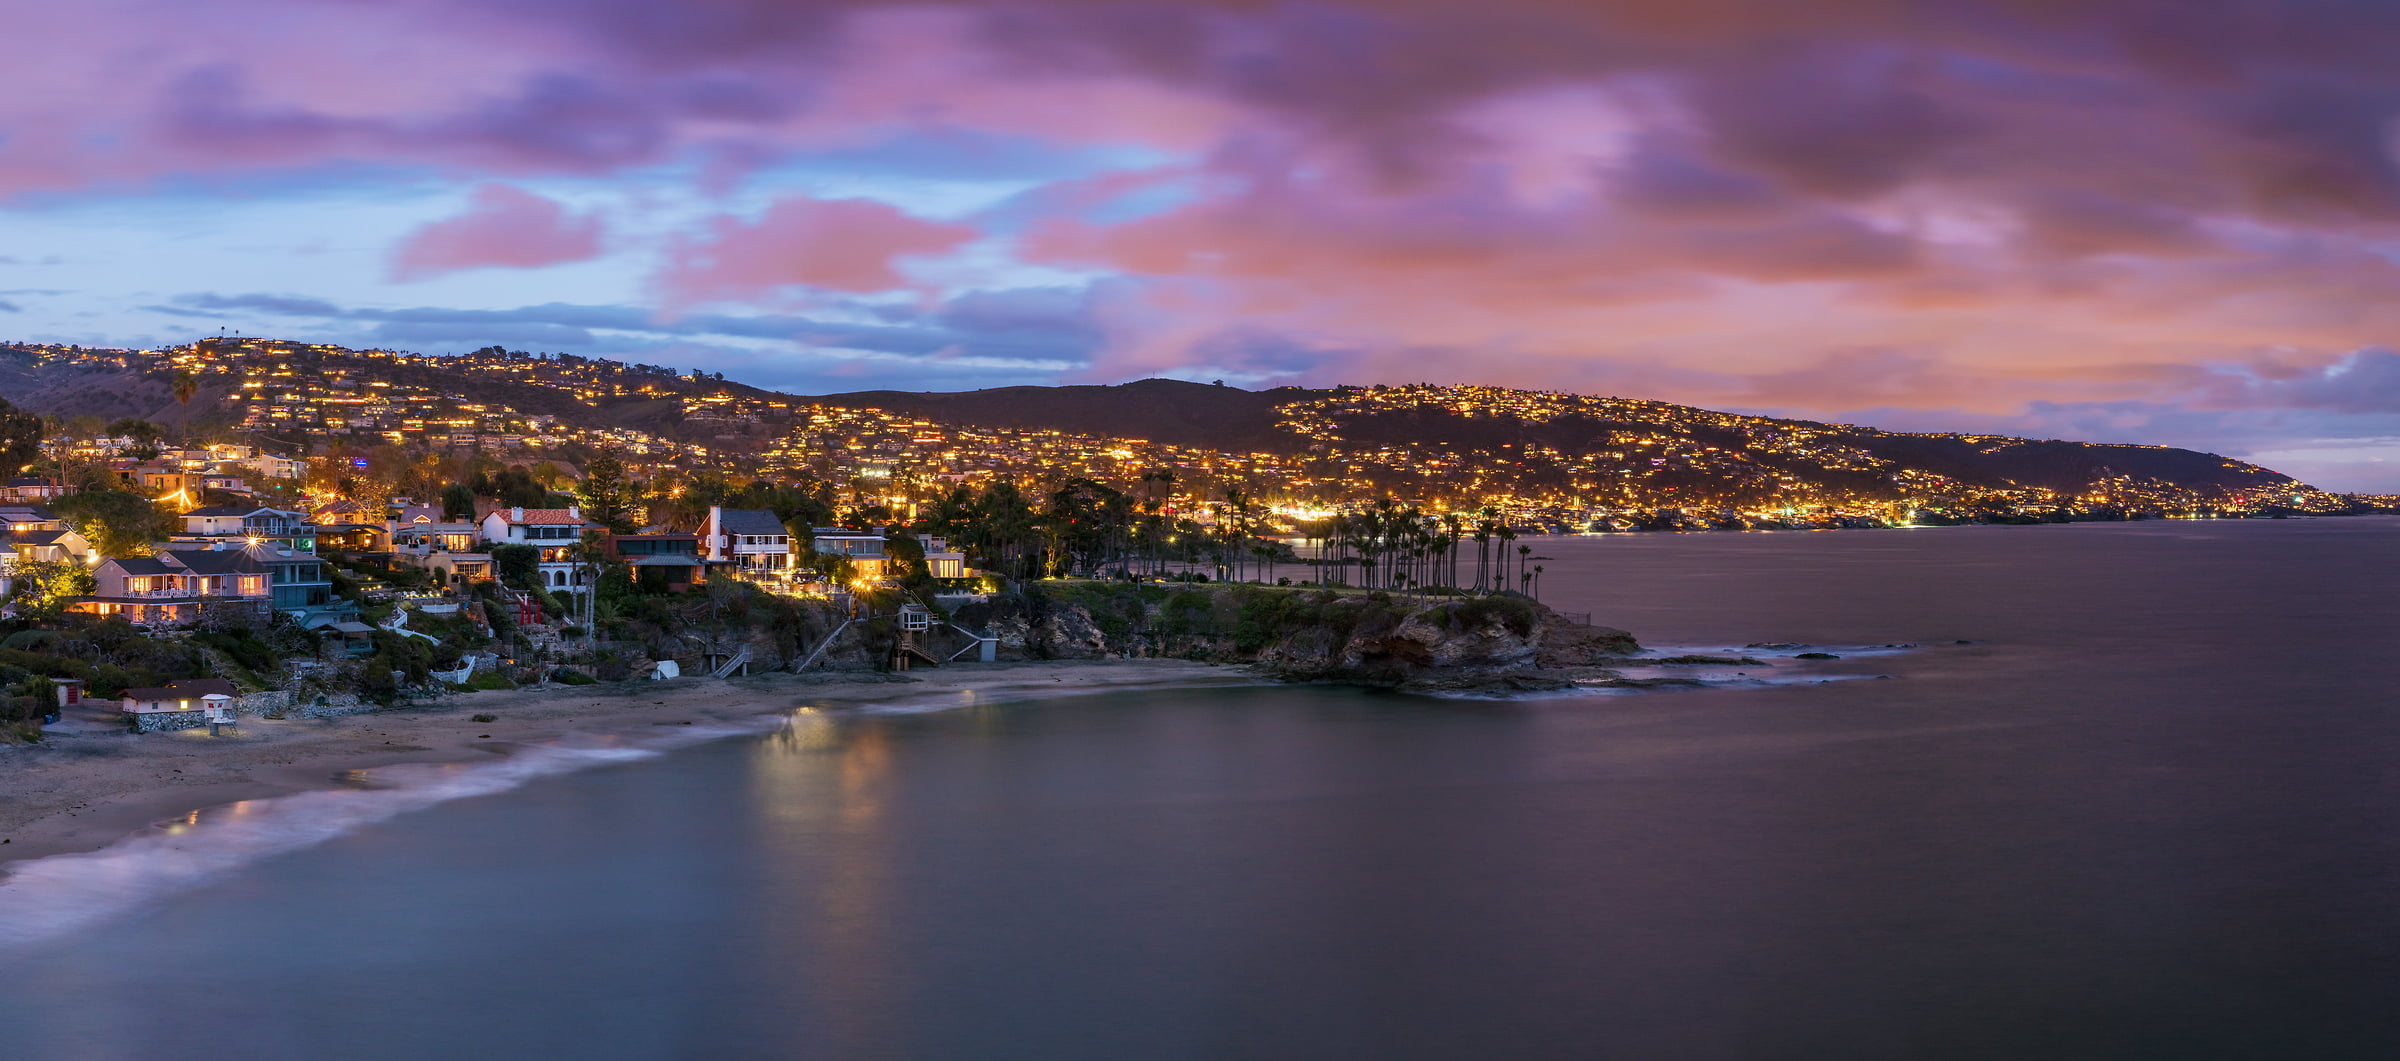 119 megapixels! A very high resolution, large-format VAST photo of Laguna Beach at sunset; landscape created by Jim Tarpo in California.